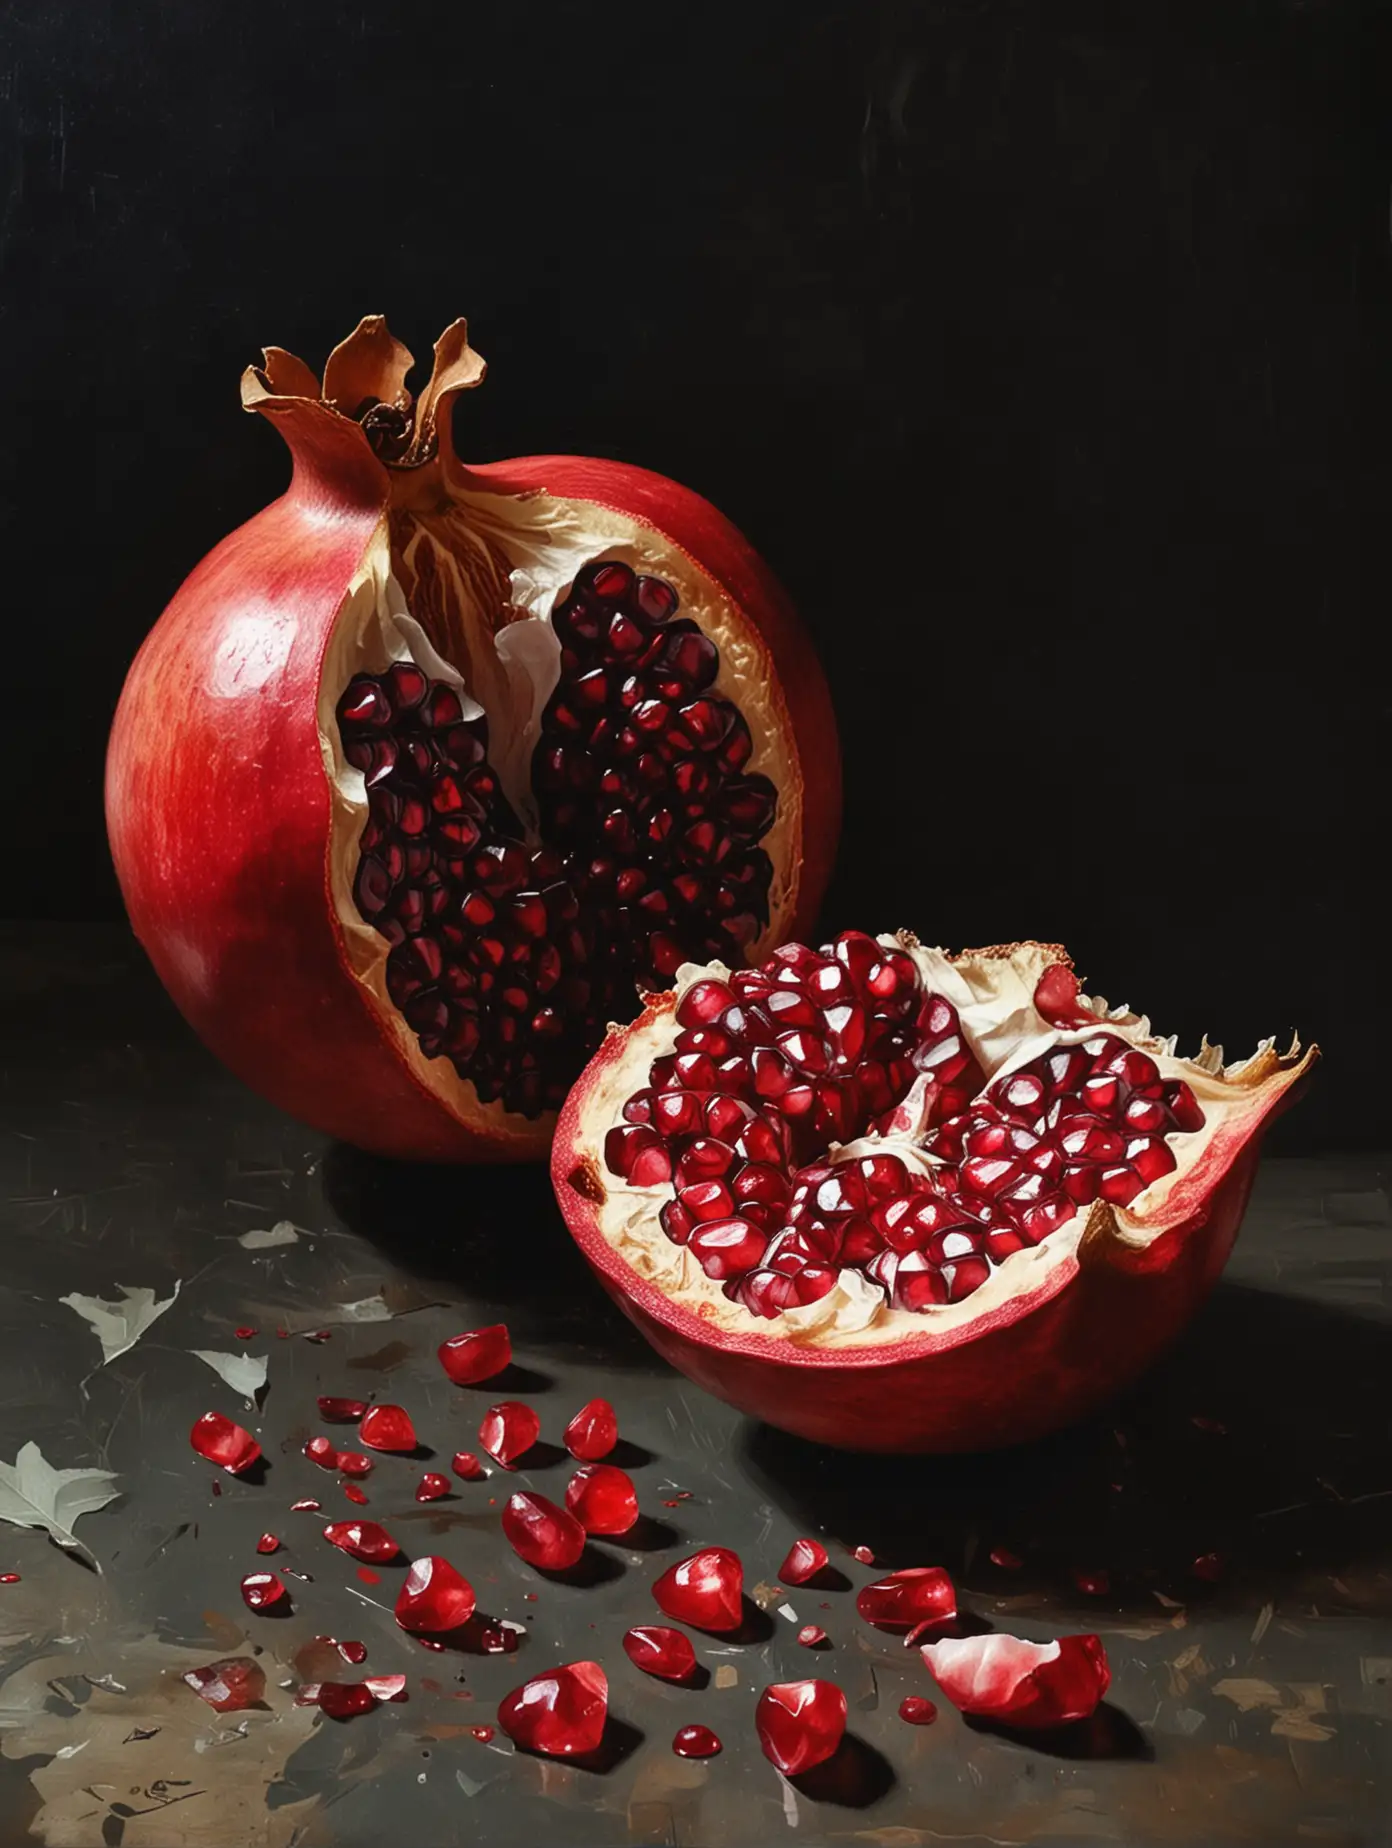 STILL LIFE PAINTING WITH POMEGRANATE TORN OPEN, WITH A DARK BACKGROUND